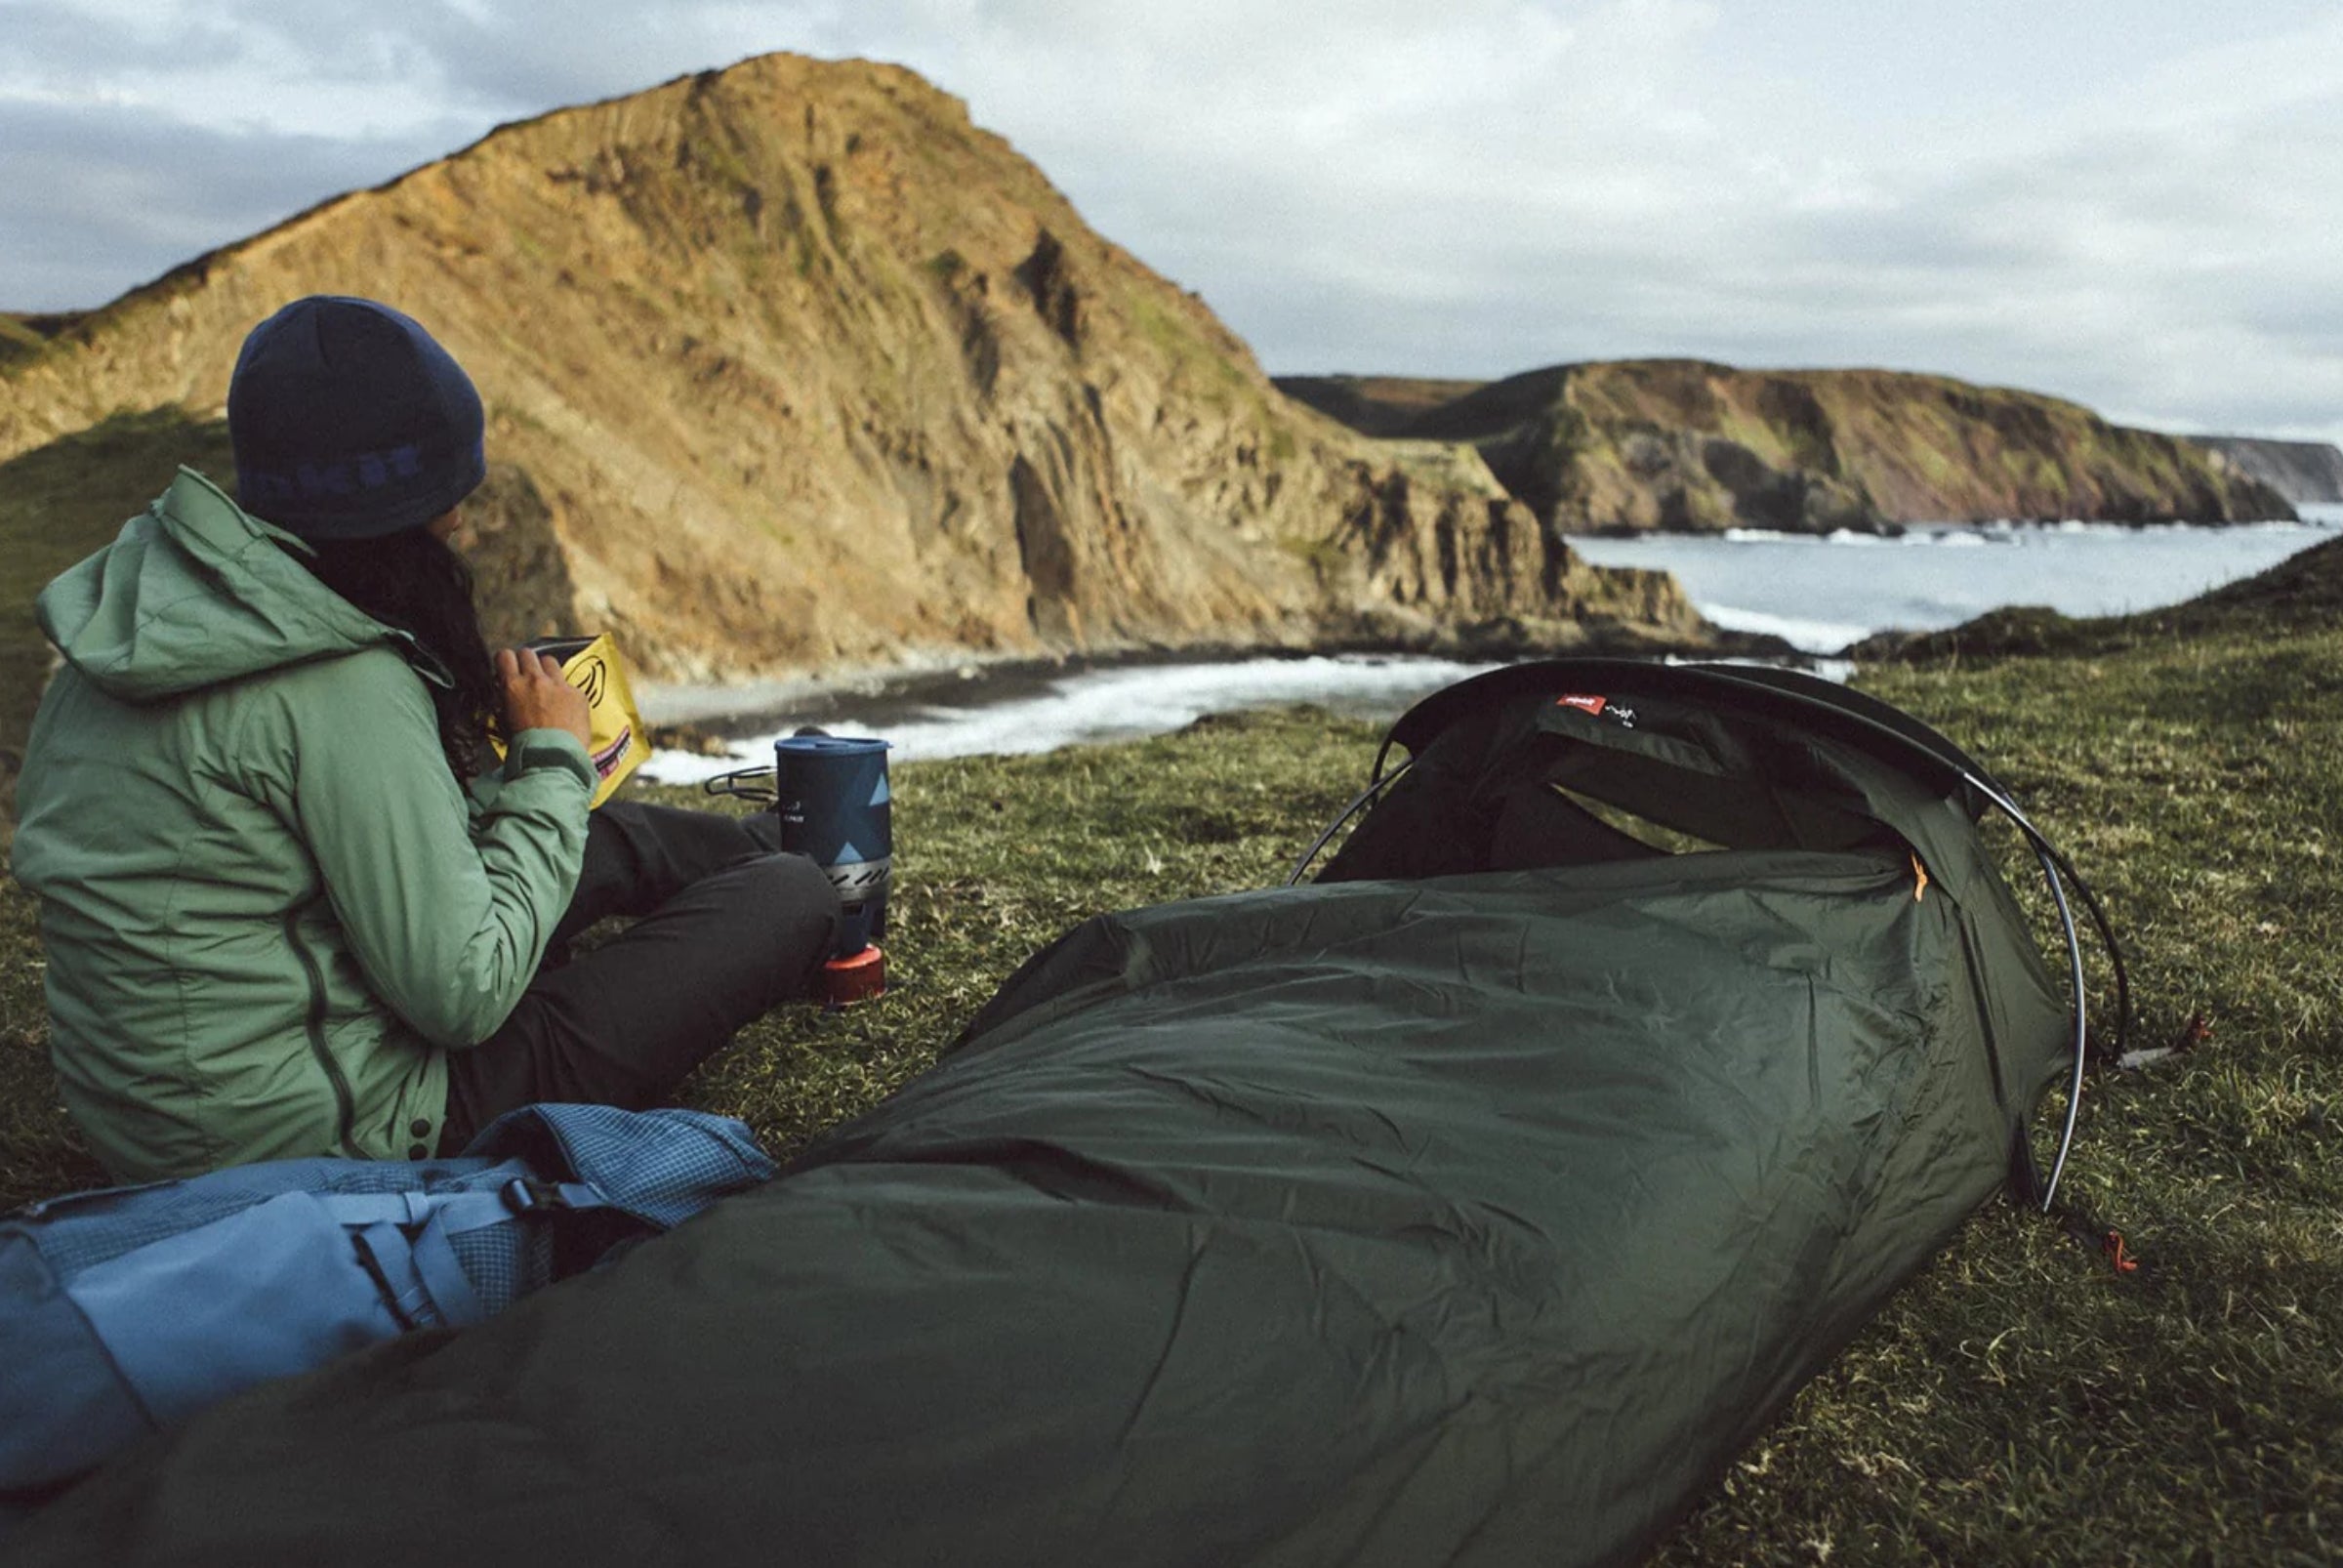 The Best Bivy Sacks Of 2022 For Backpacking, Climbing & More » Explorersweb